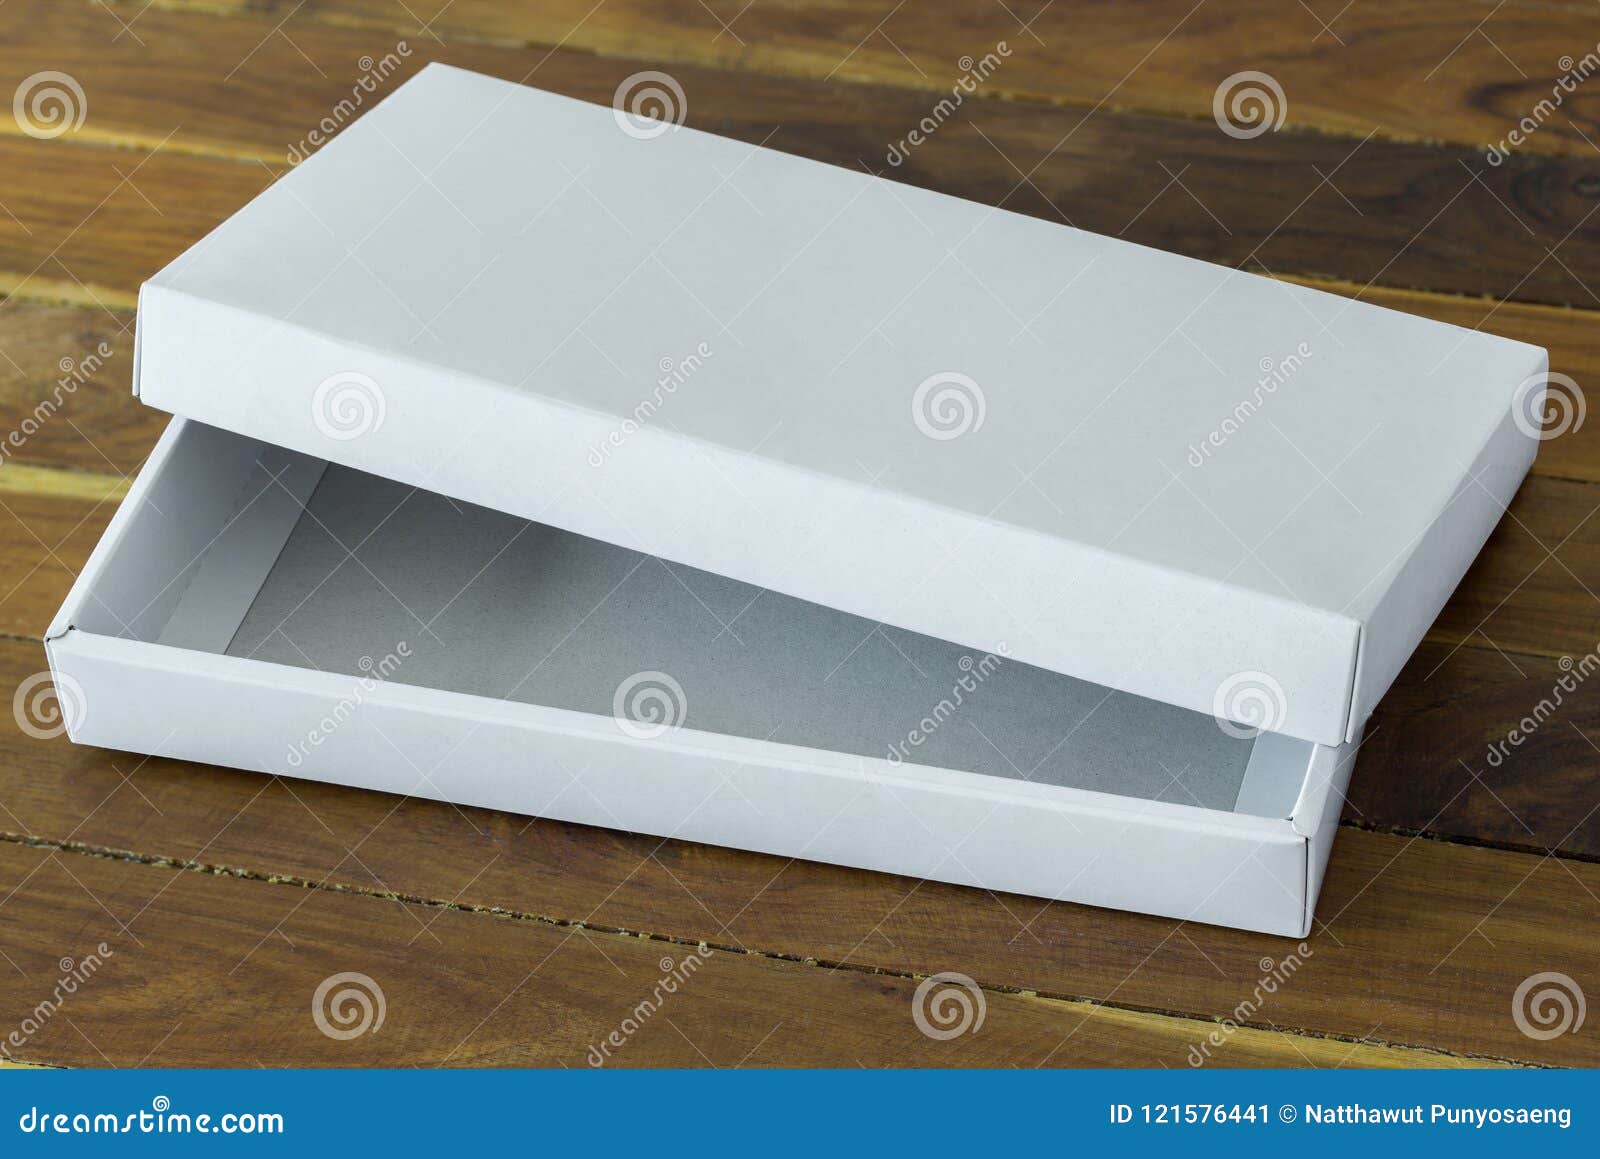 Download Open White Cardboard Package Box Mockup Stock Image ...